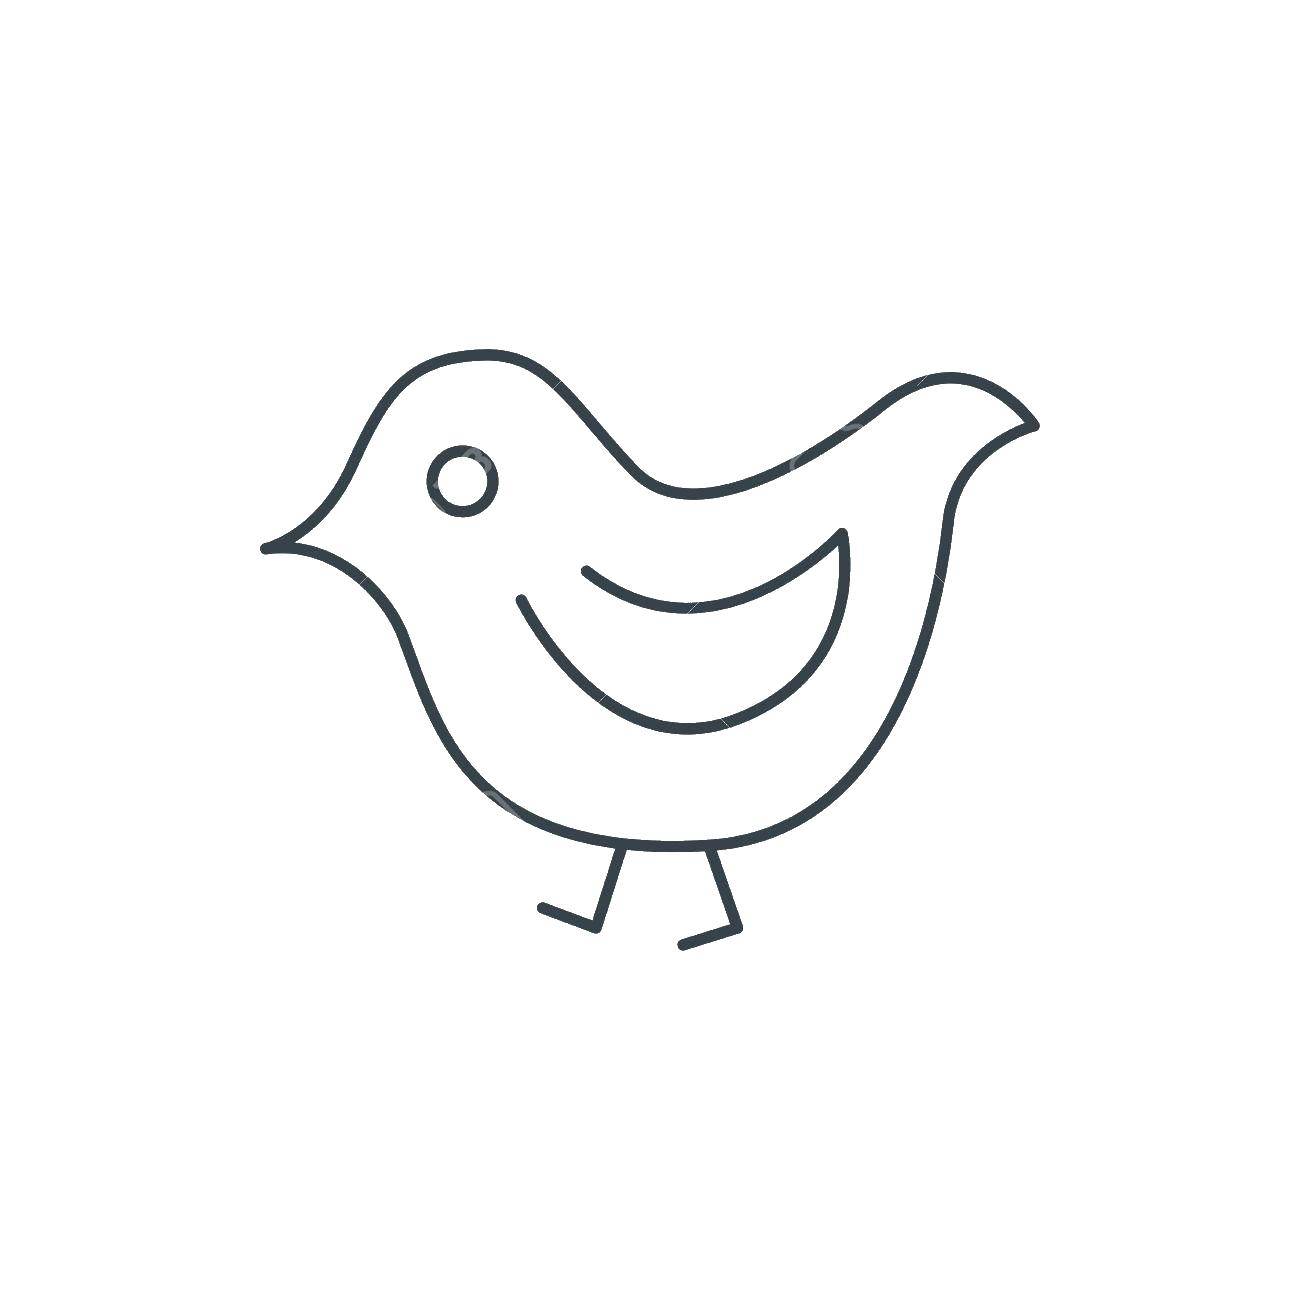 Coloring Simple bird. Category Coloring pages for kids. Tags:  for kids, a bird.